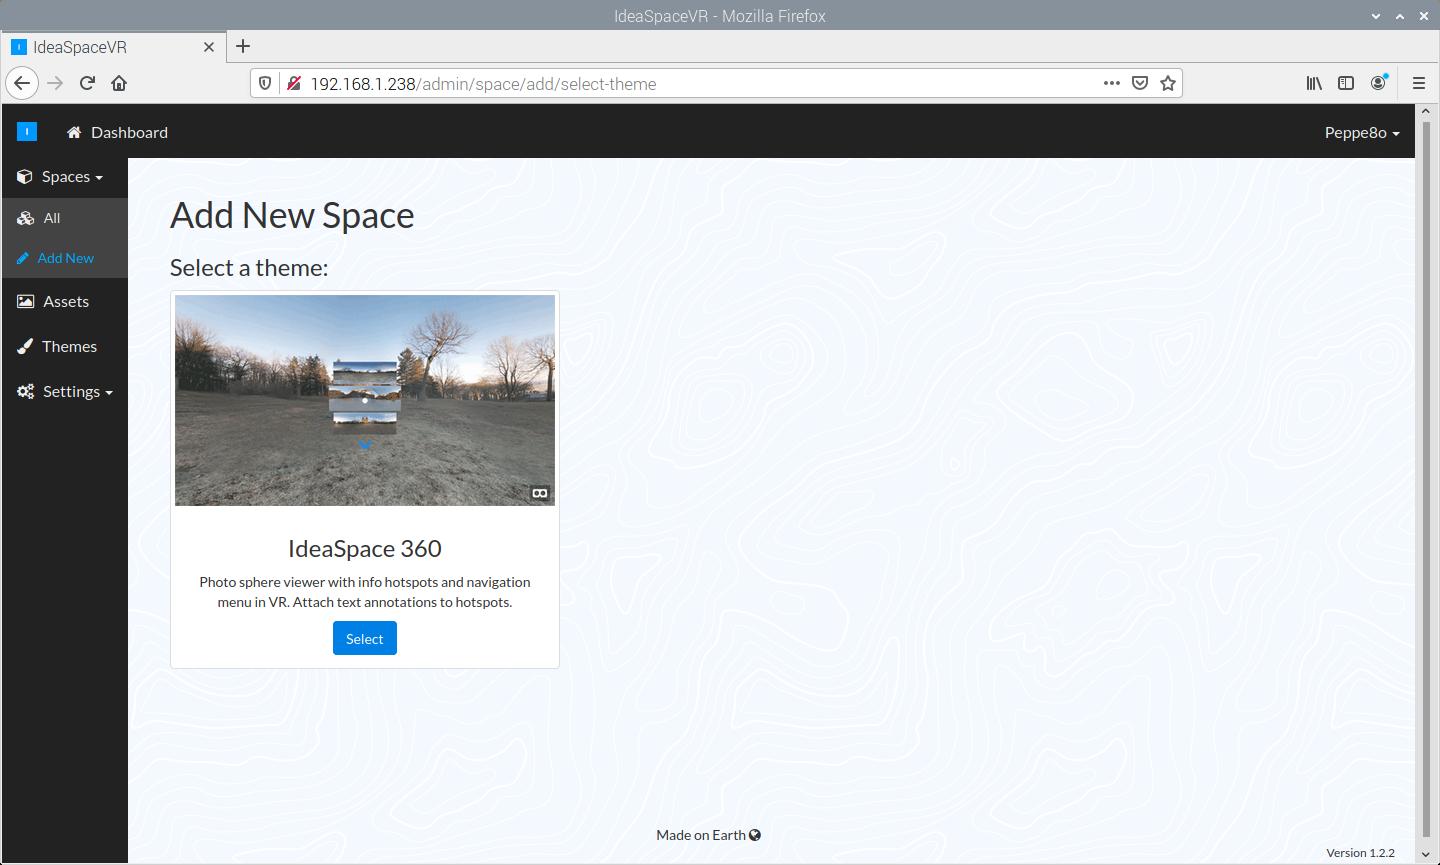 IdeaSpaceVR Spaces add new